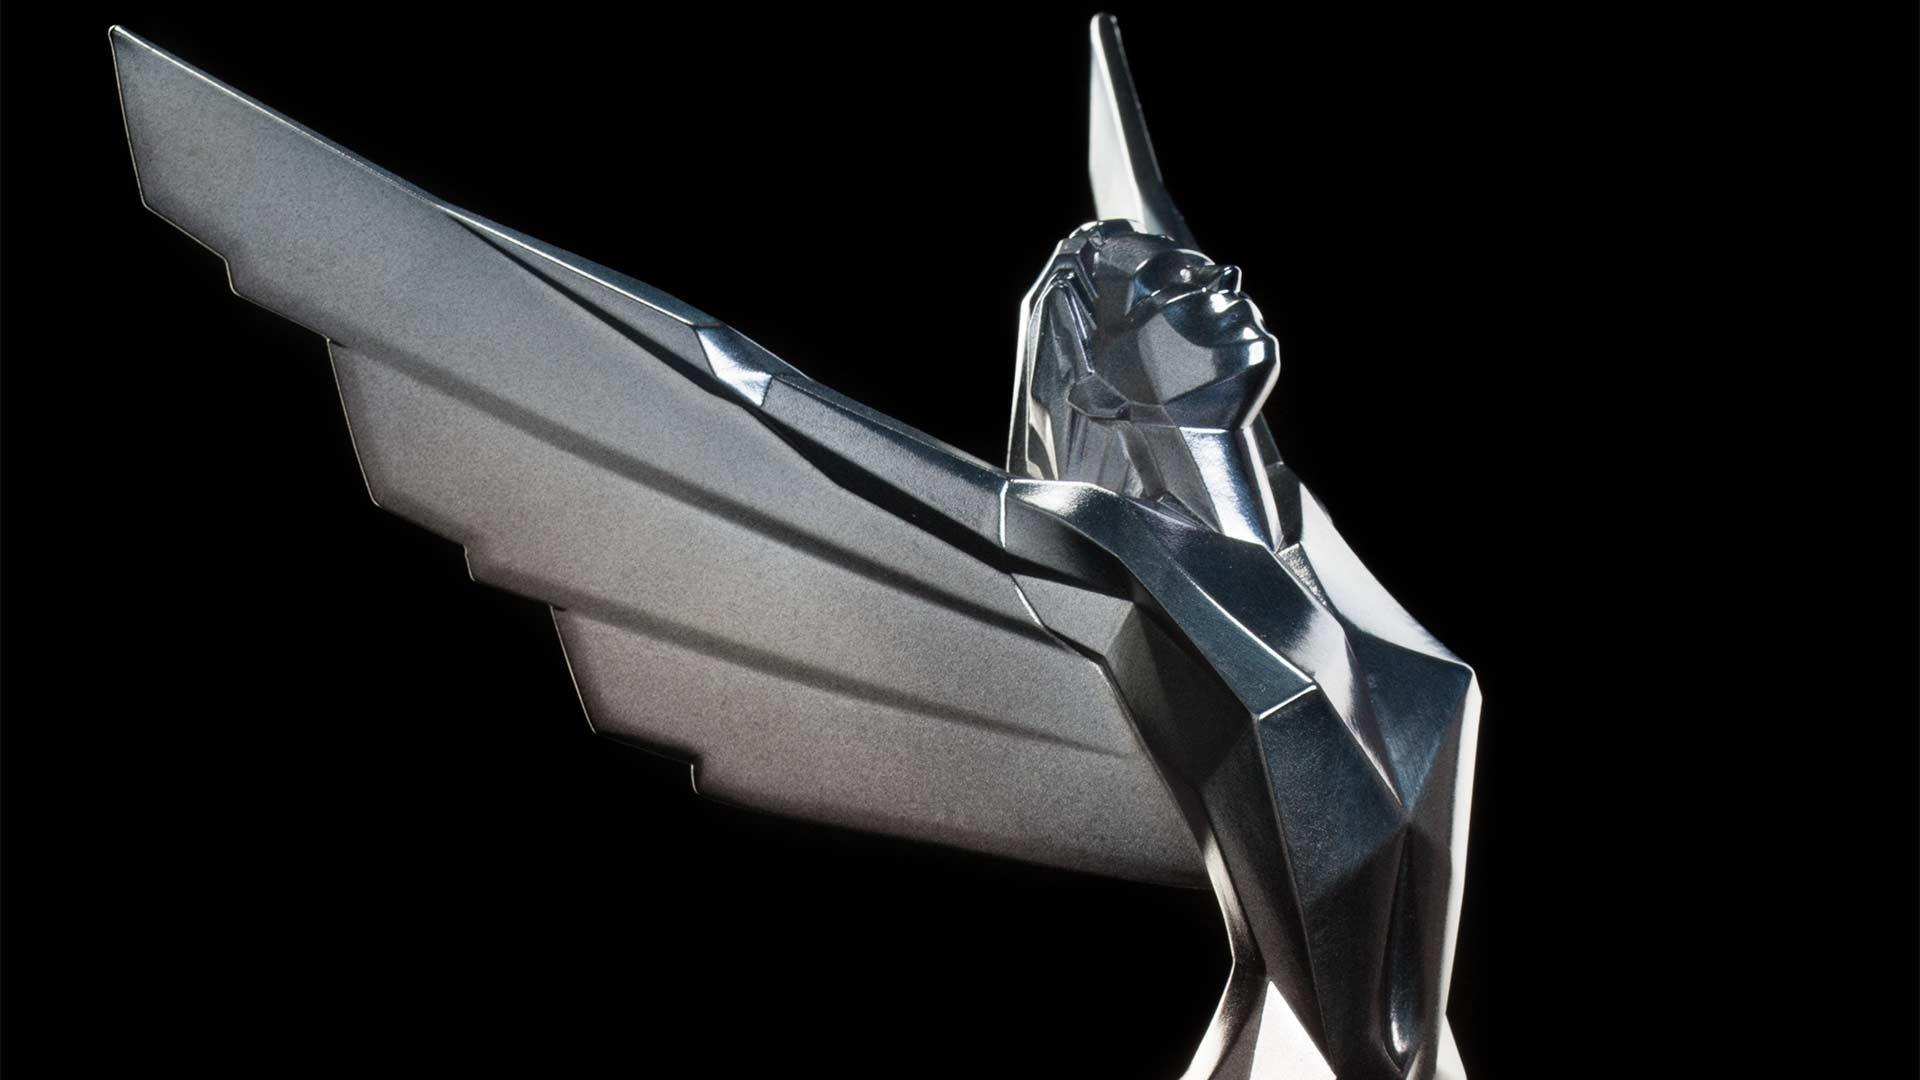 What Time Does The Game Awards 2019 Start? - Guide